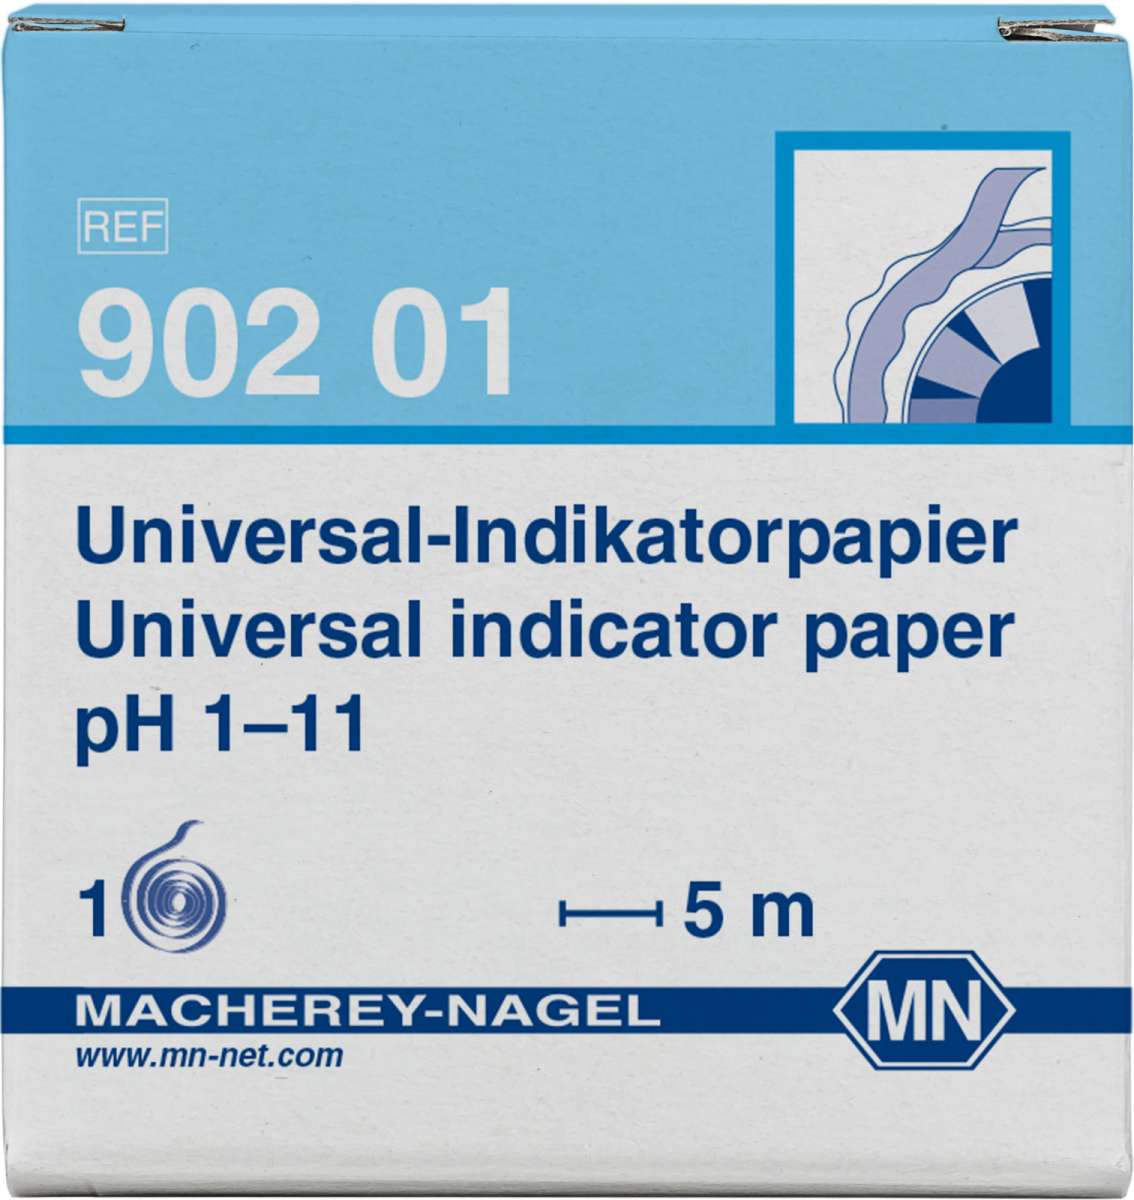 Universal indicator paper pH 1 to 11 (Reel of 5m length and 7mm width)